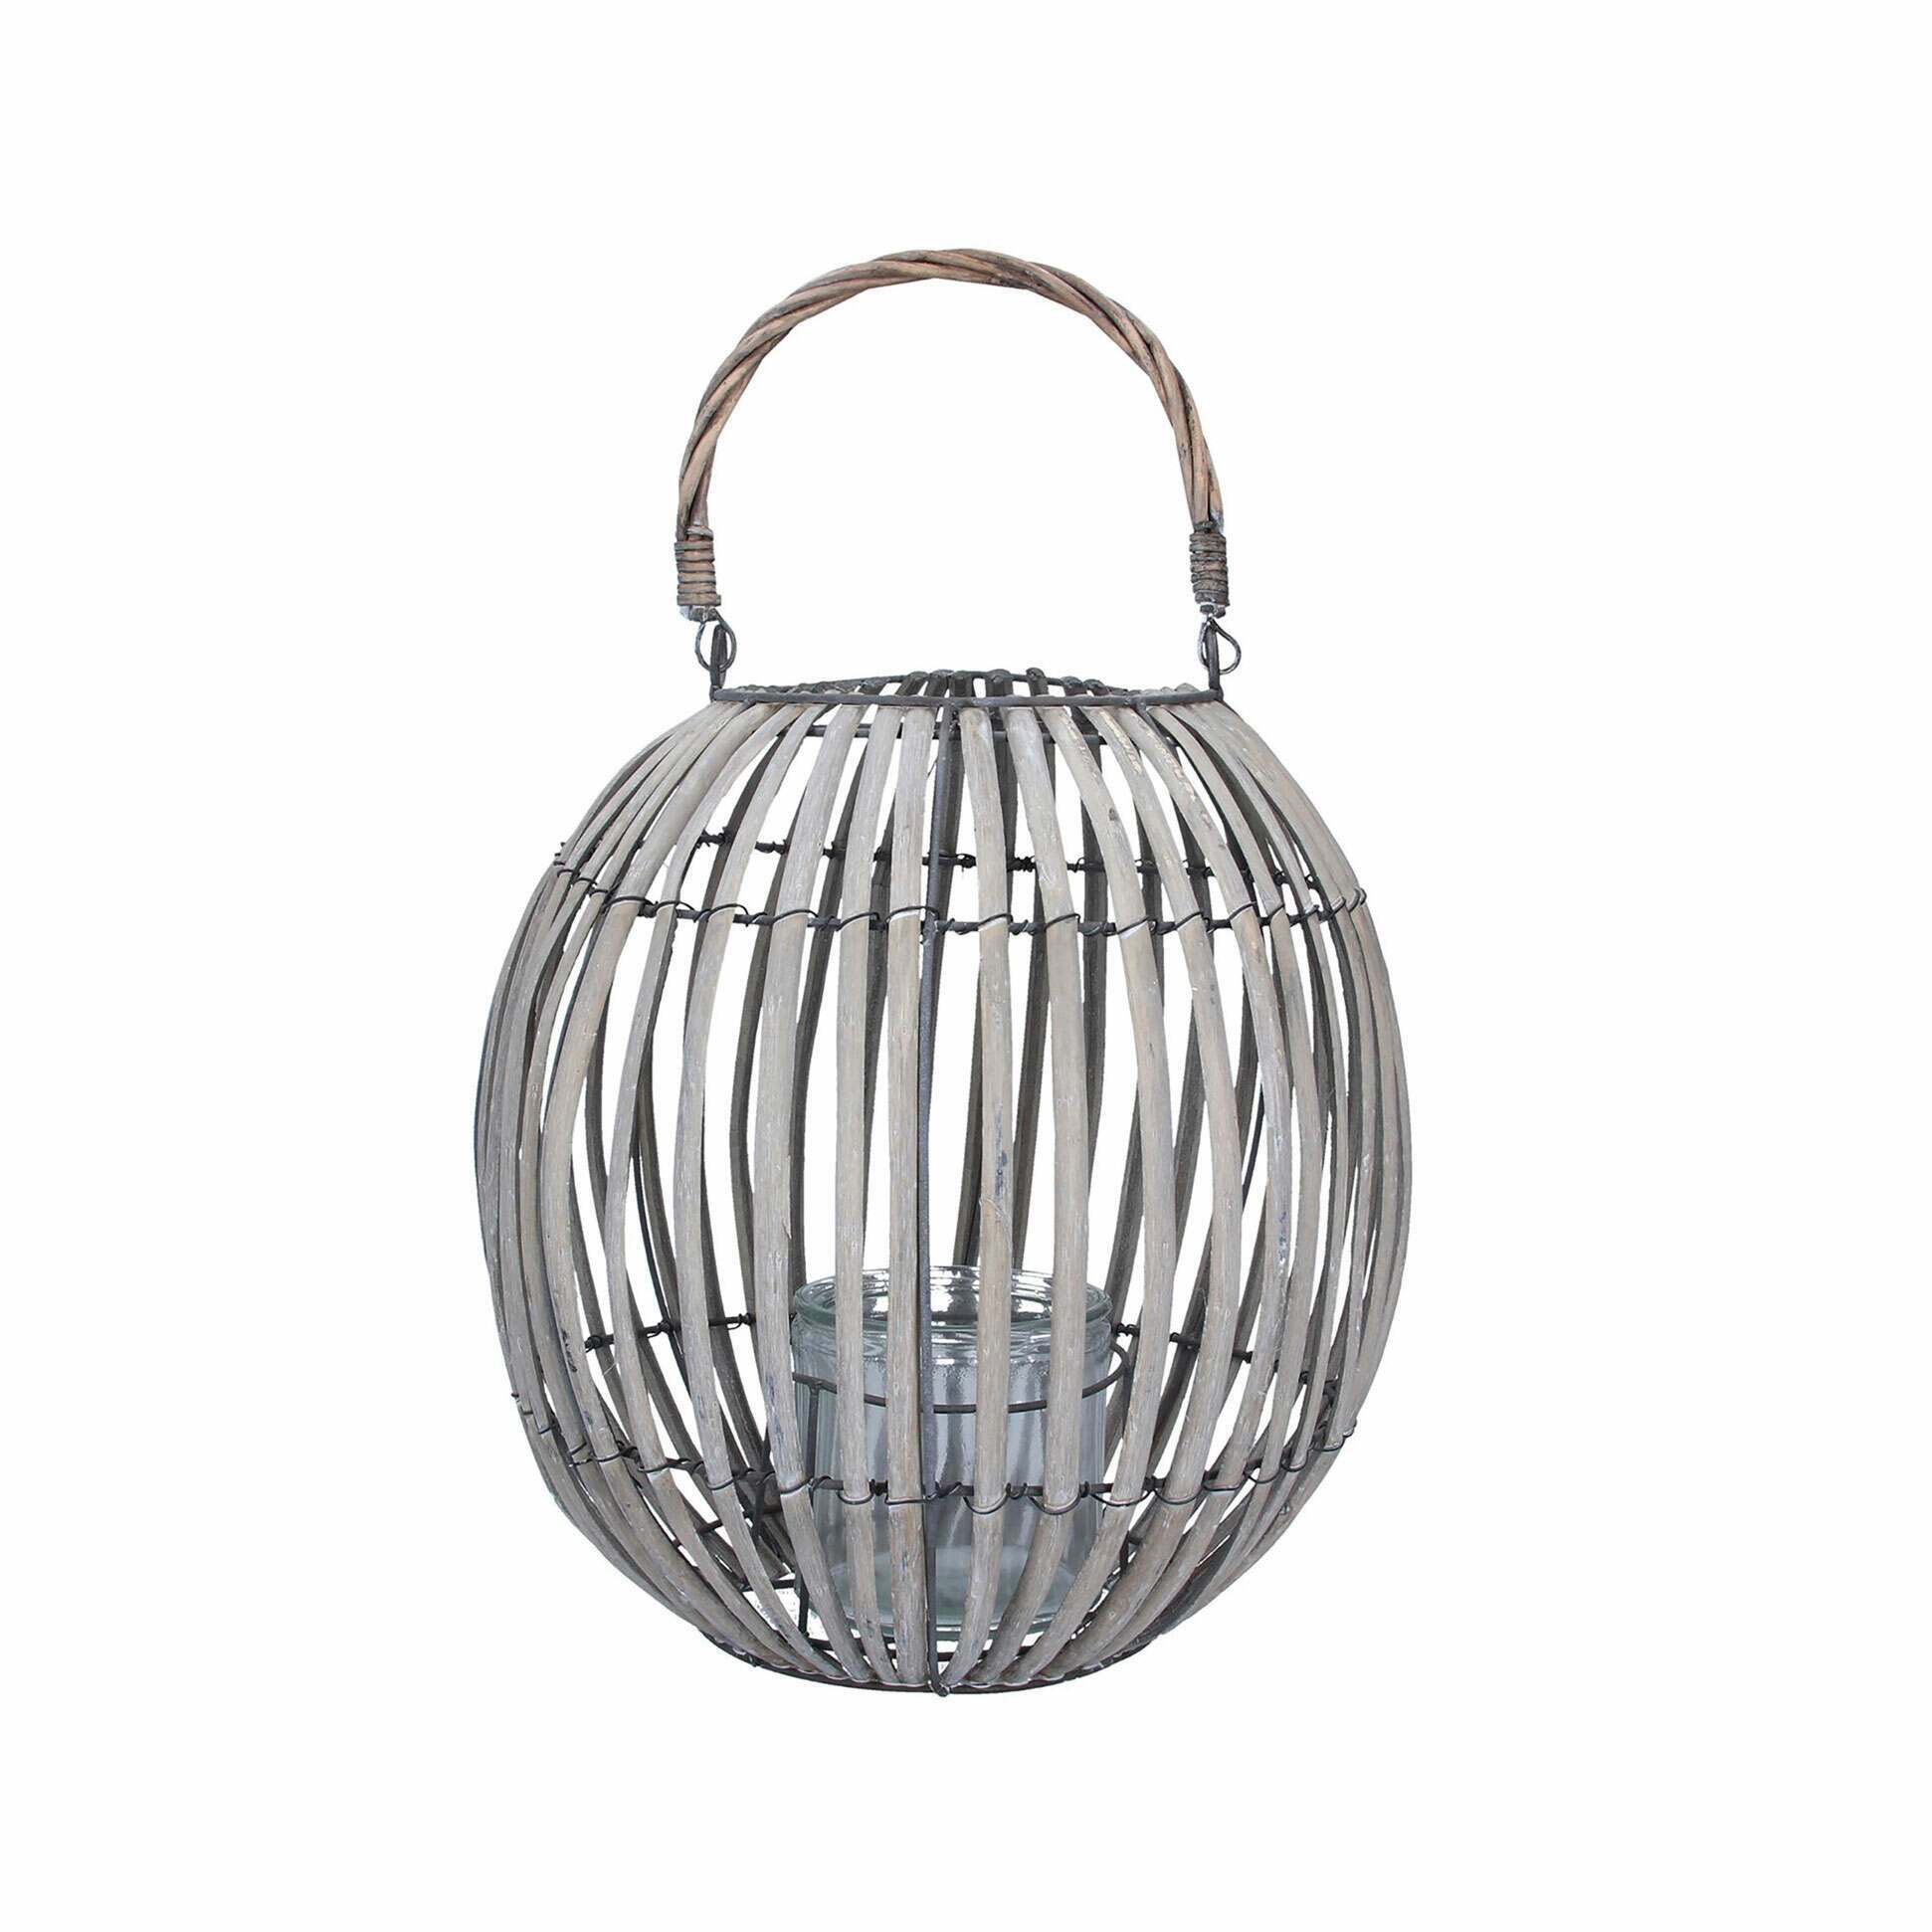 Read more about Graham and green round grey wicker lantern